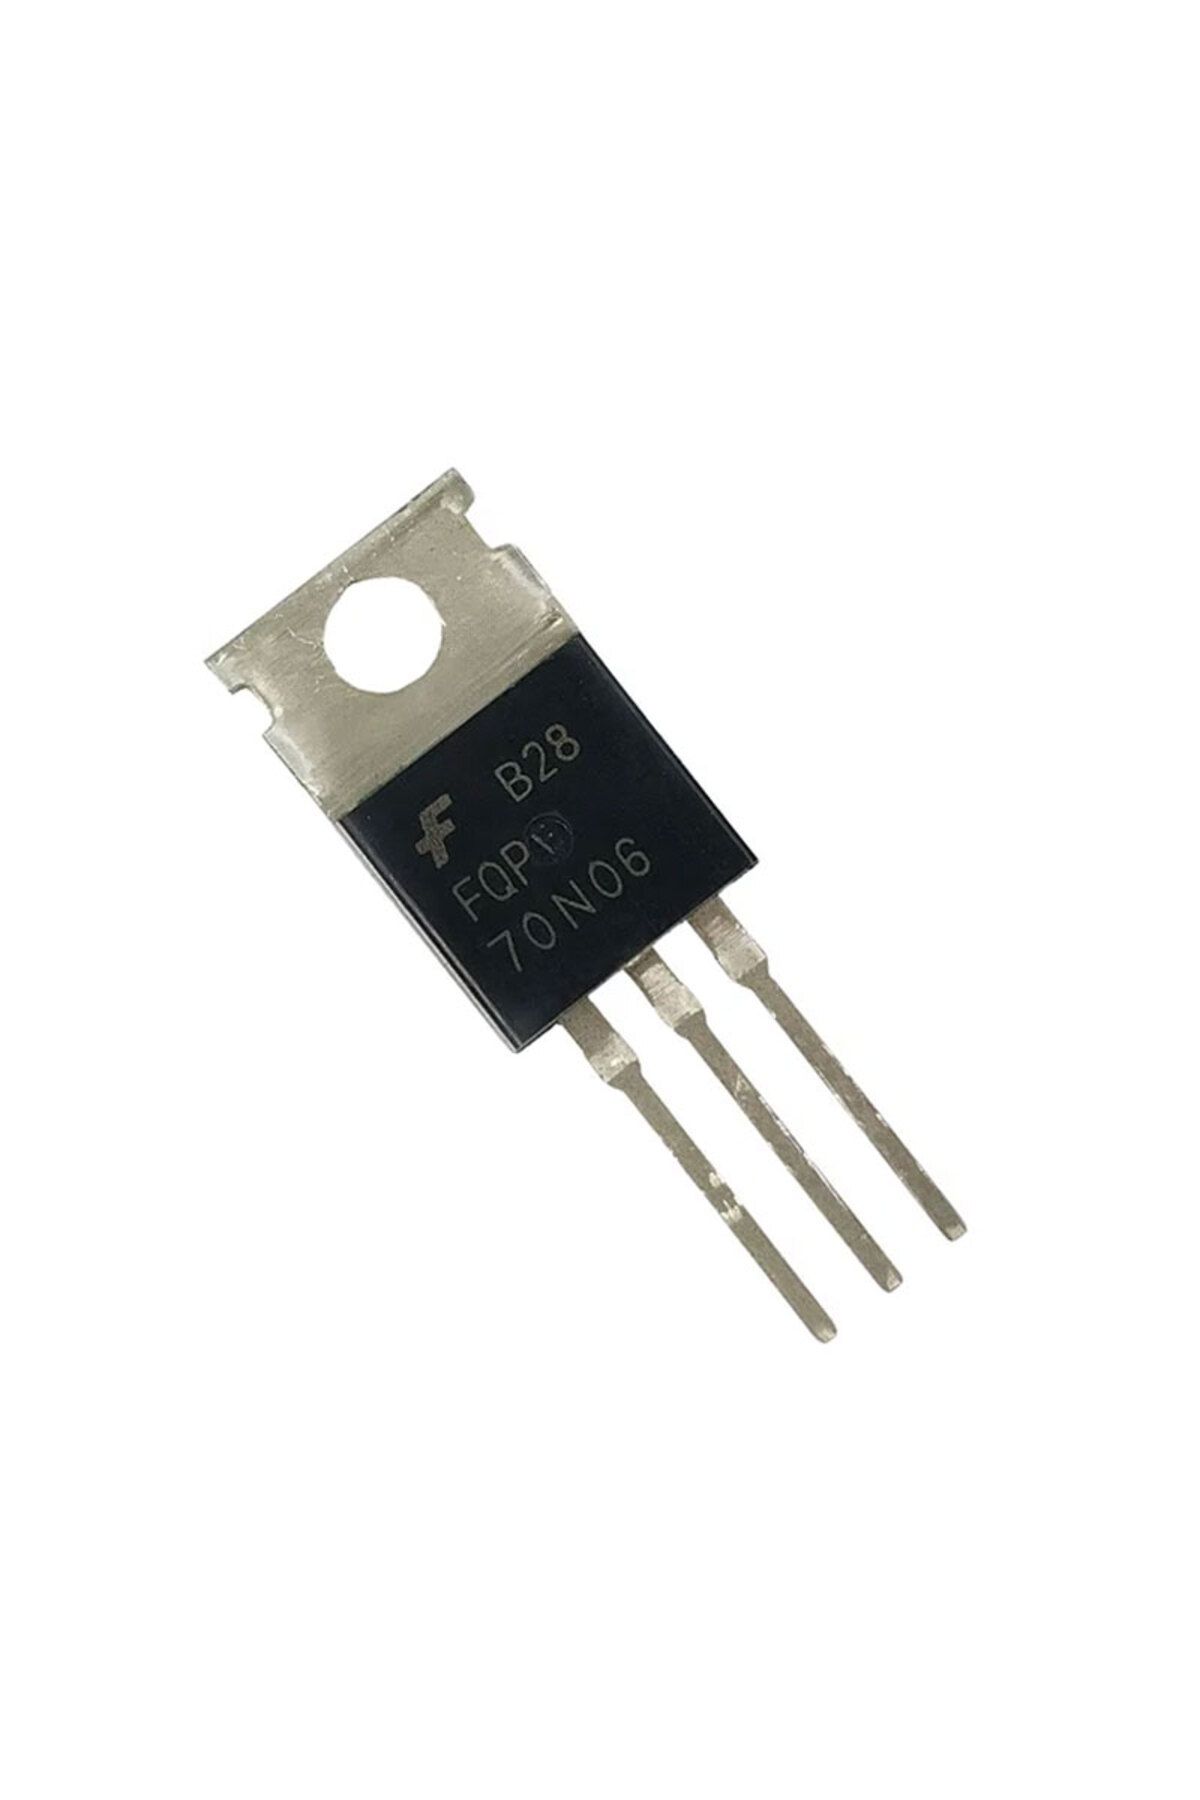 DİMA OFFİCİAL 70N06 TO-220 MOSFET TRANSISTOR